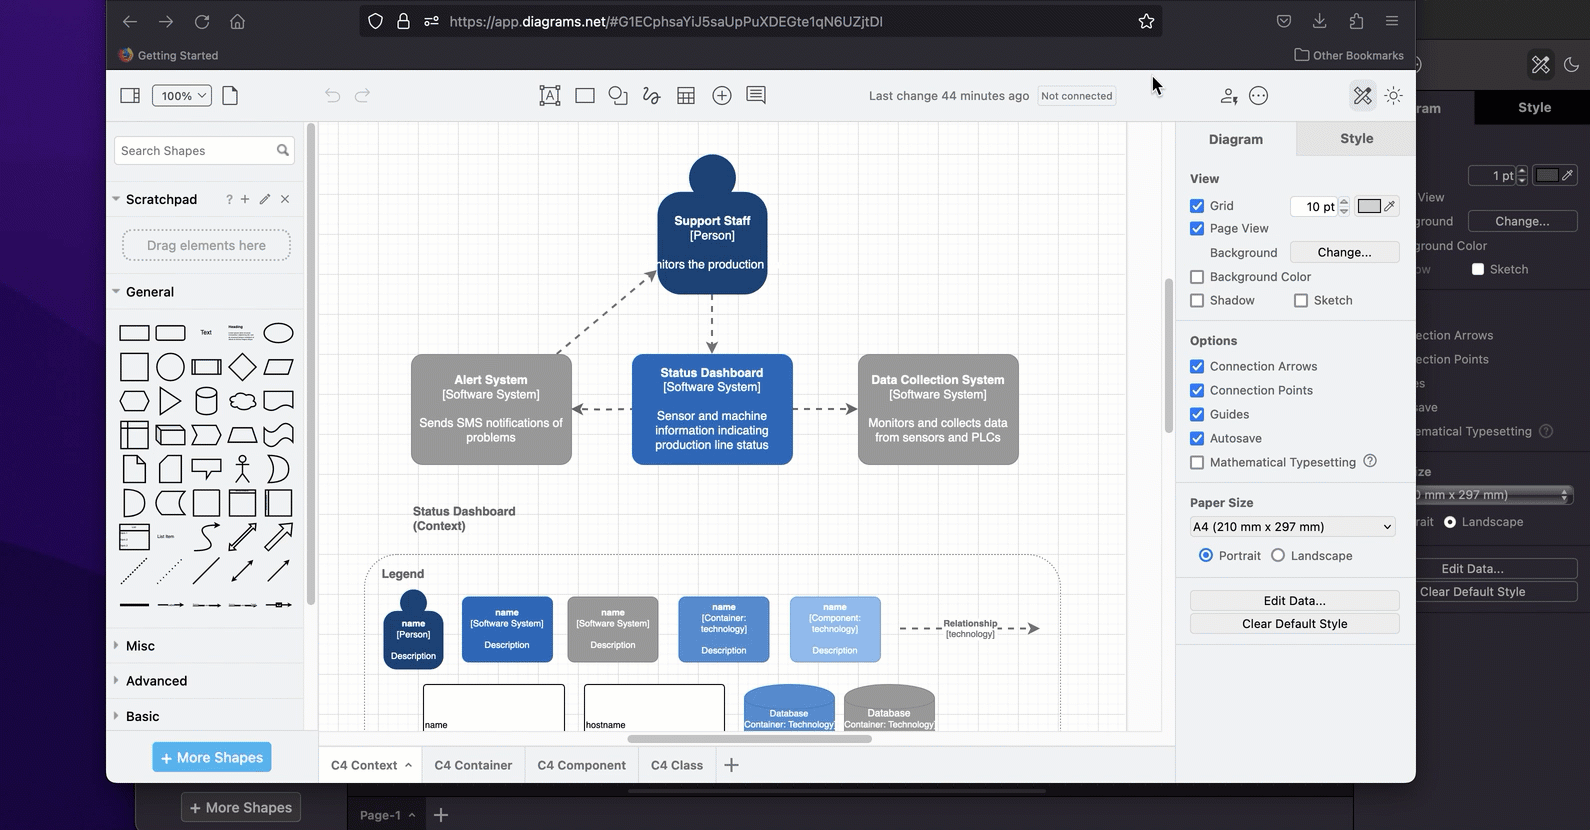 Include the diagram data in a diagram file you share with colleagues to allow them to edit a copy in draw.io - no account needed